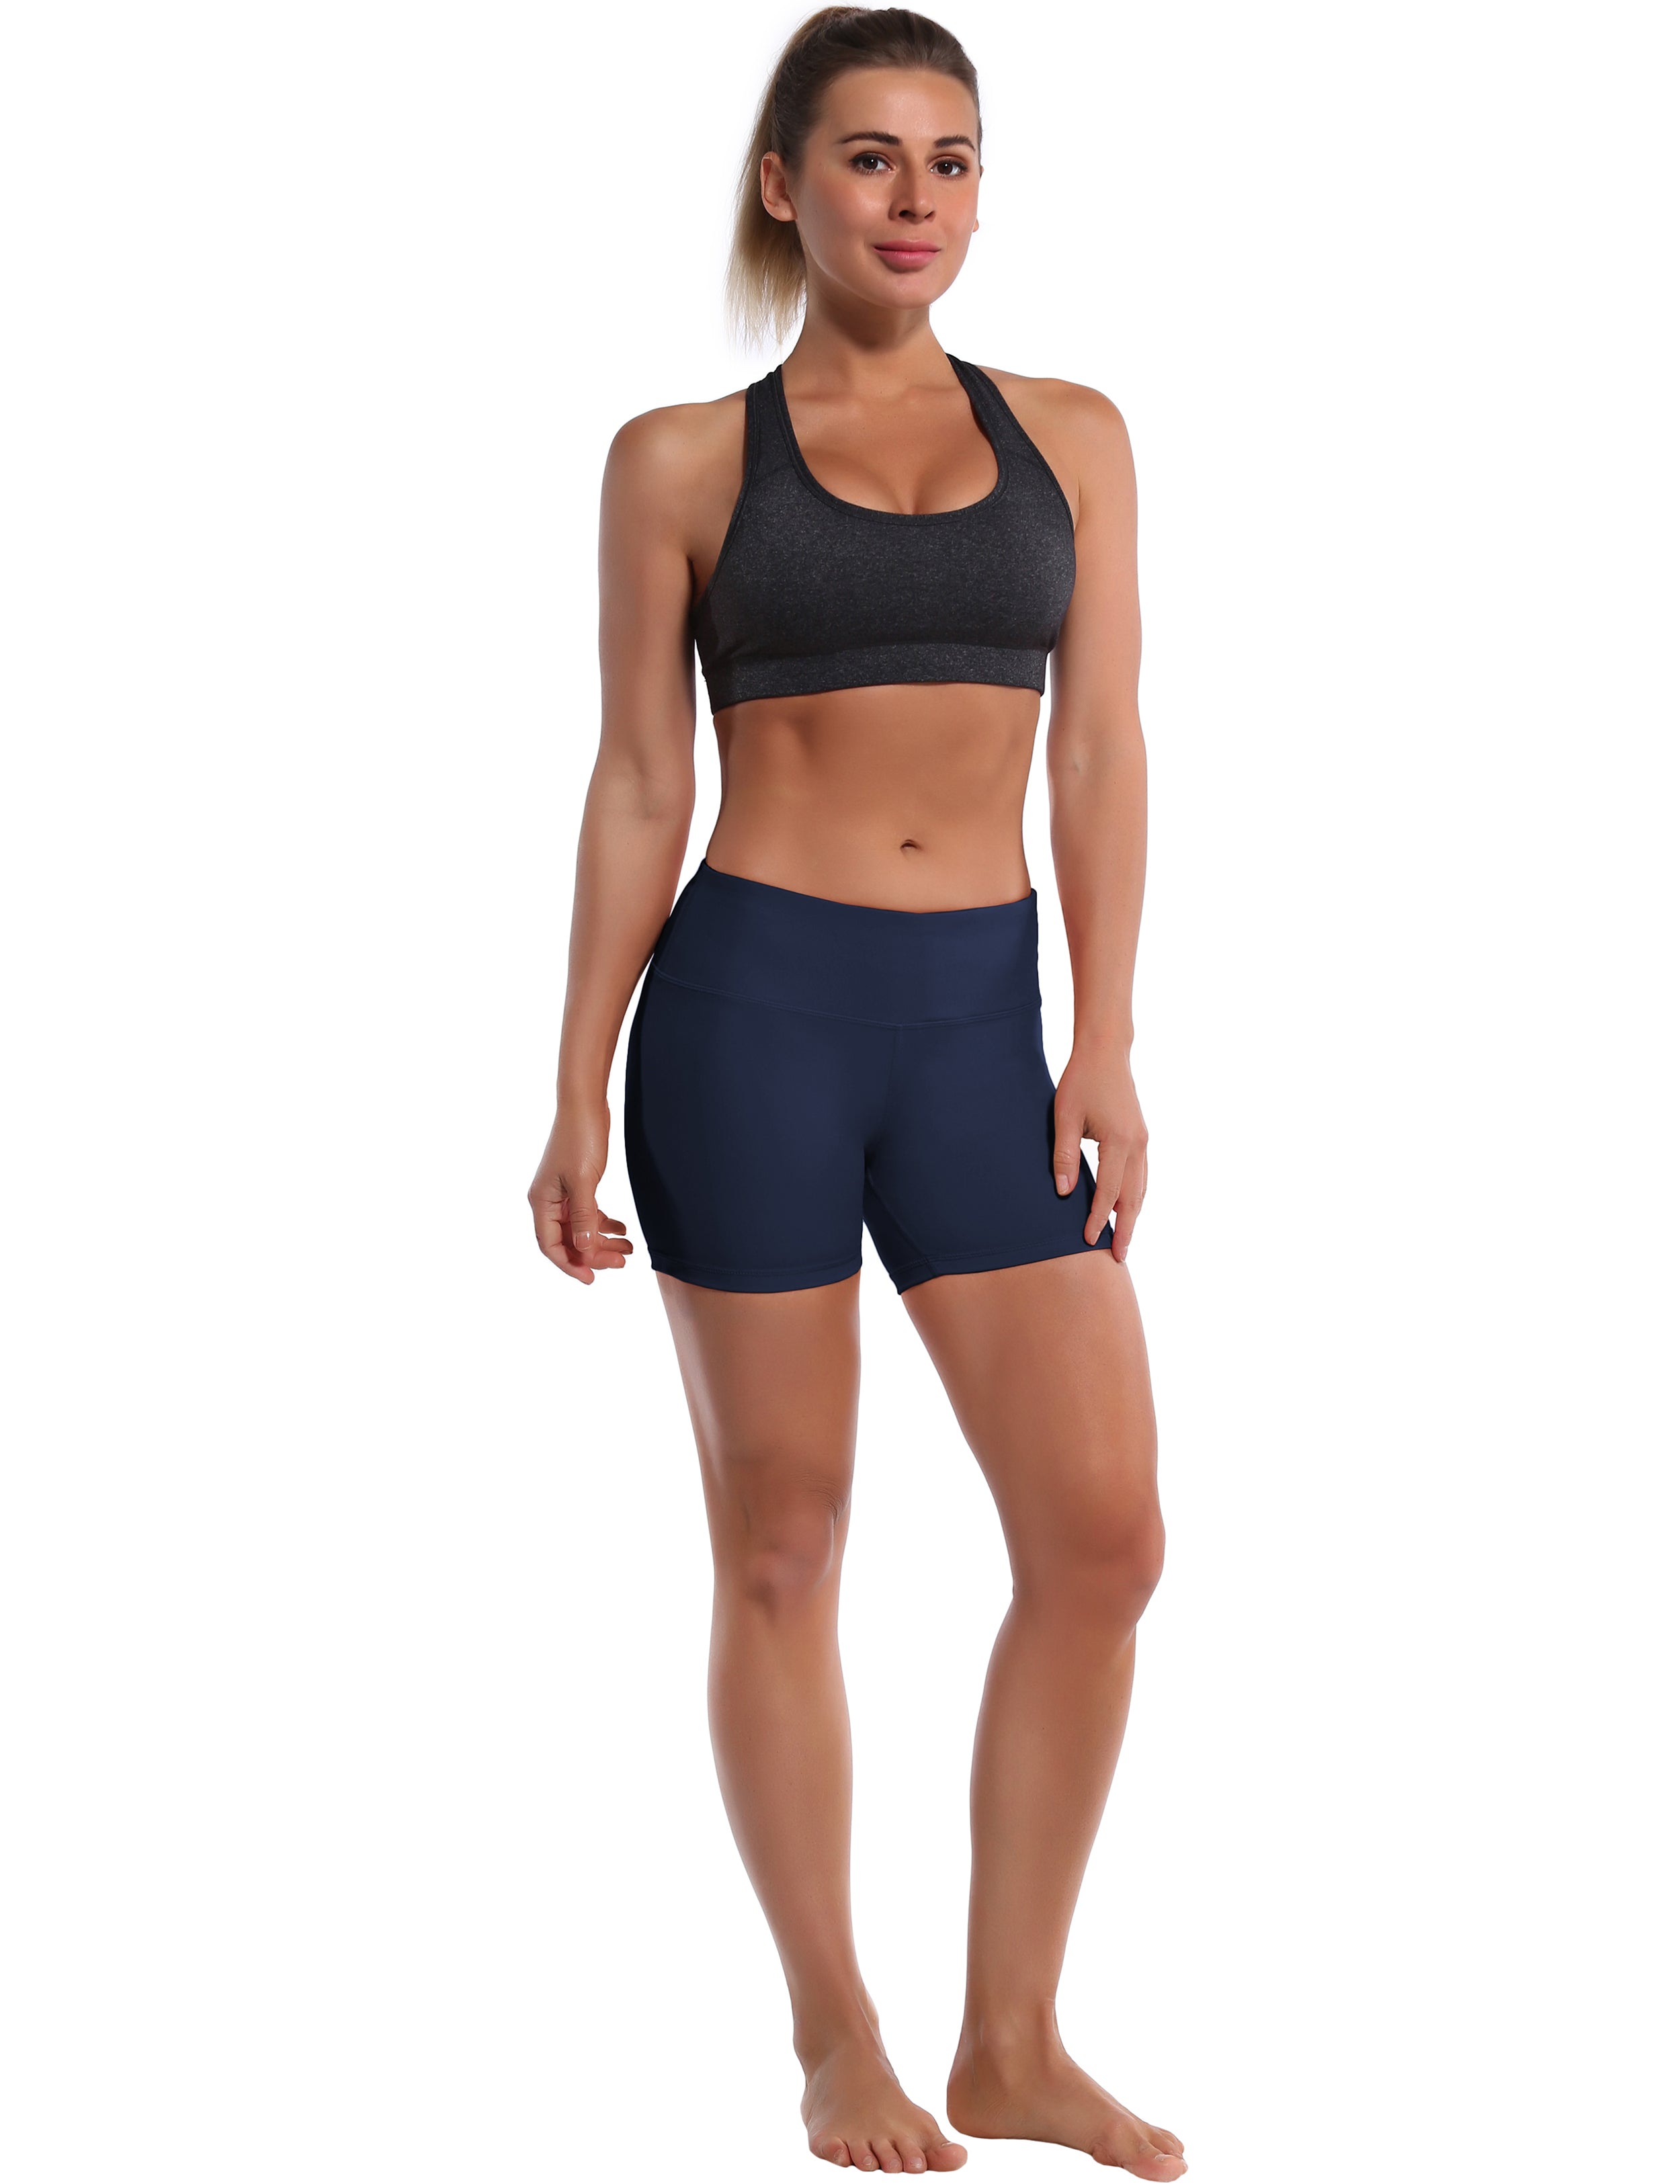 4" Jogging Shorts darknavy Sleek, soft, smooth and totally comfortable: our newest style is here. Softest-ever fabric High elasticity High density 4-way stretch Fabric doesn't attract lint easily No see-through Moisture-wicking Machine wash 75% Nylon, 25% Spandex